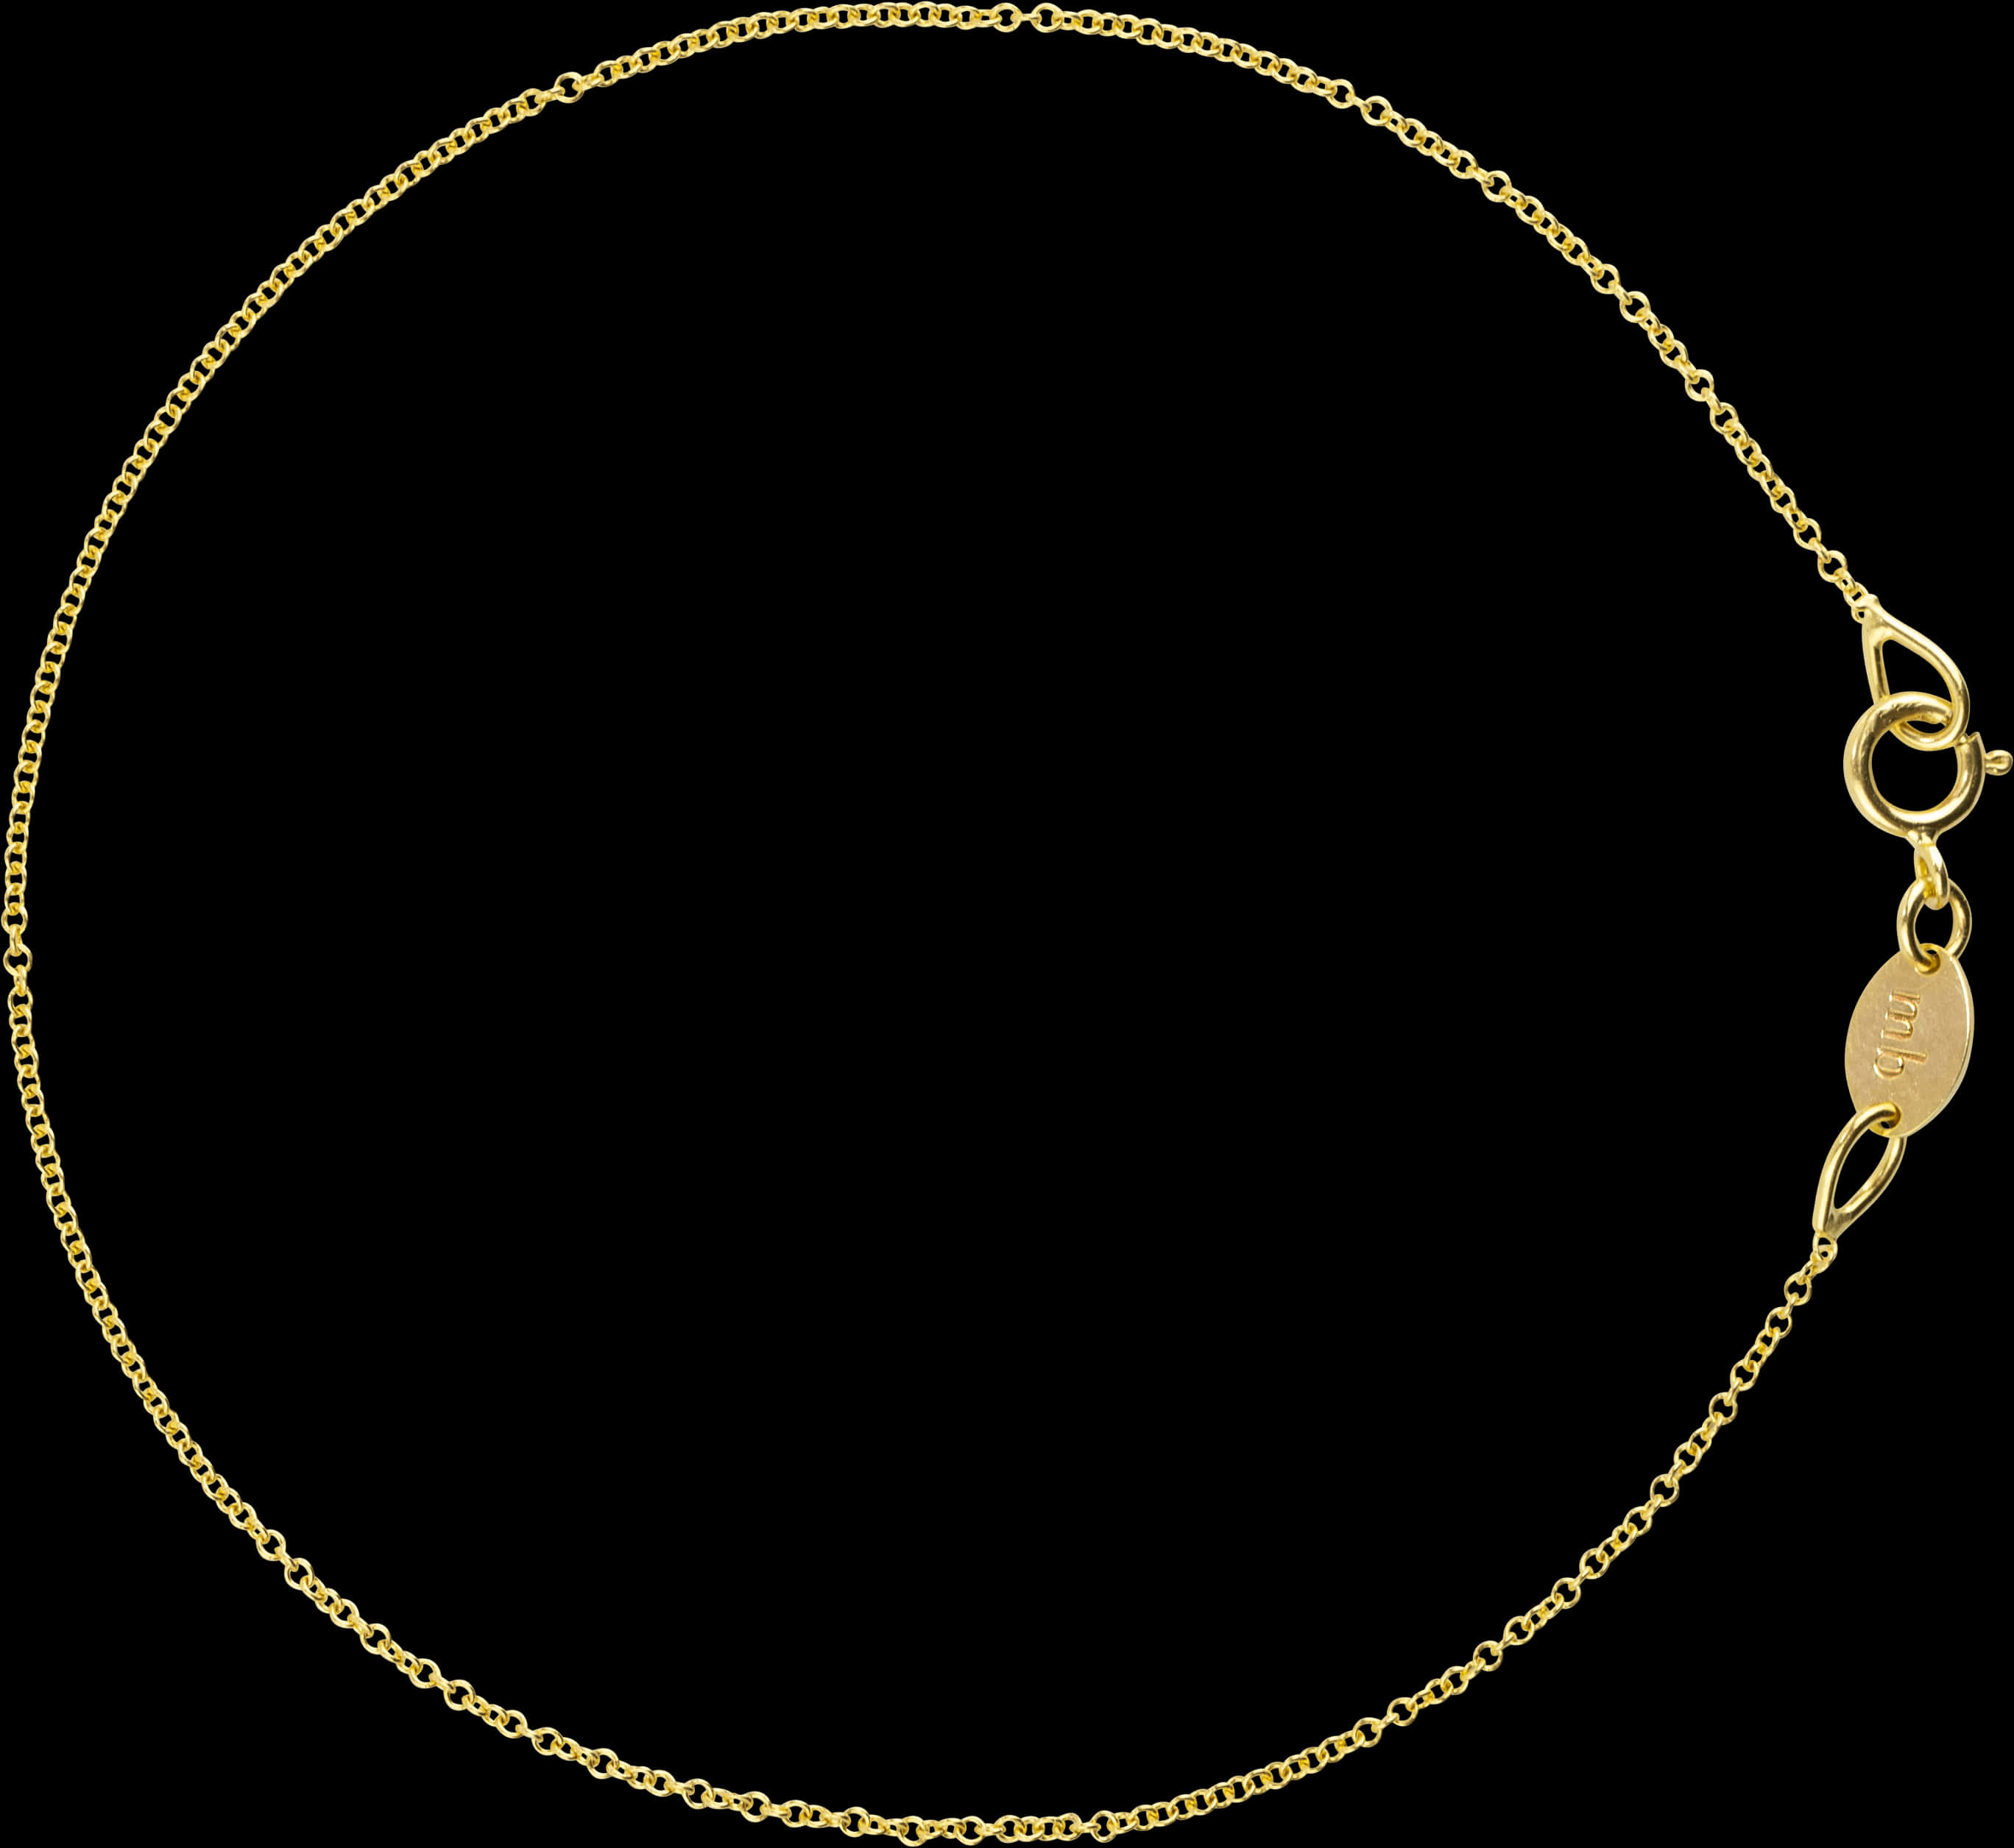 A Gold Chain With A Clasp